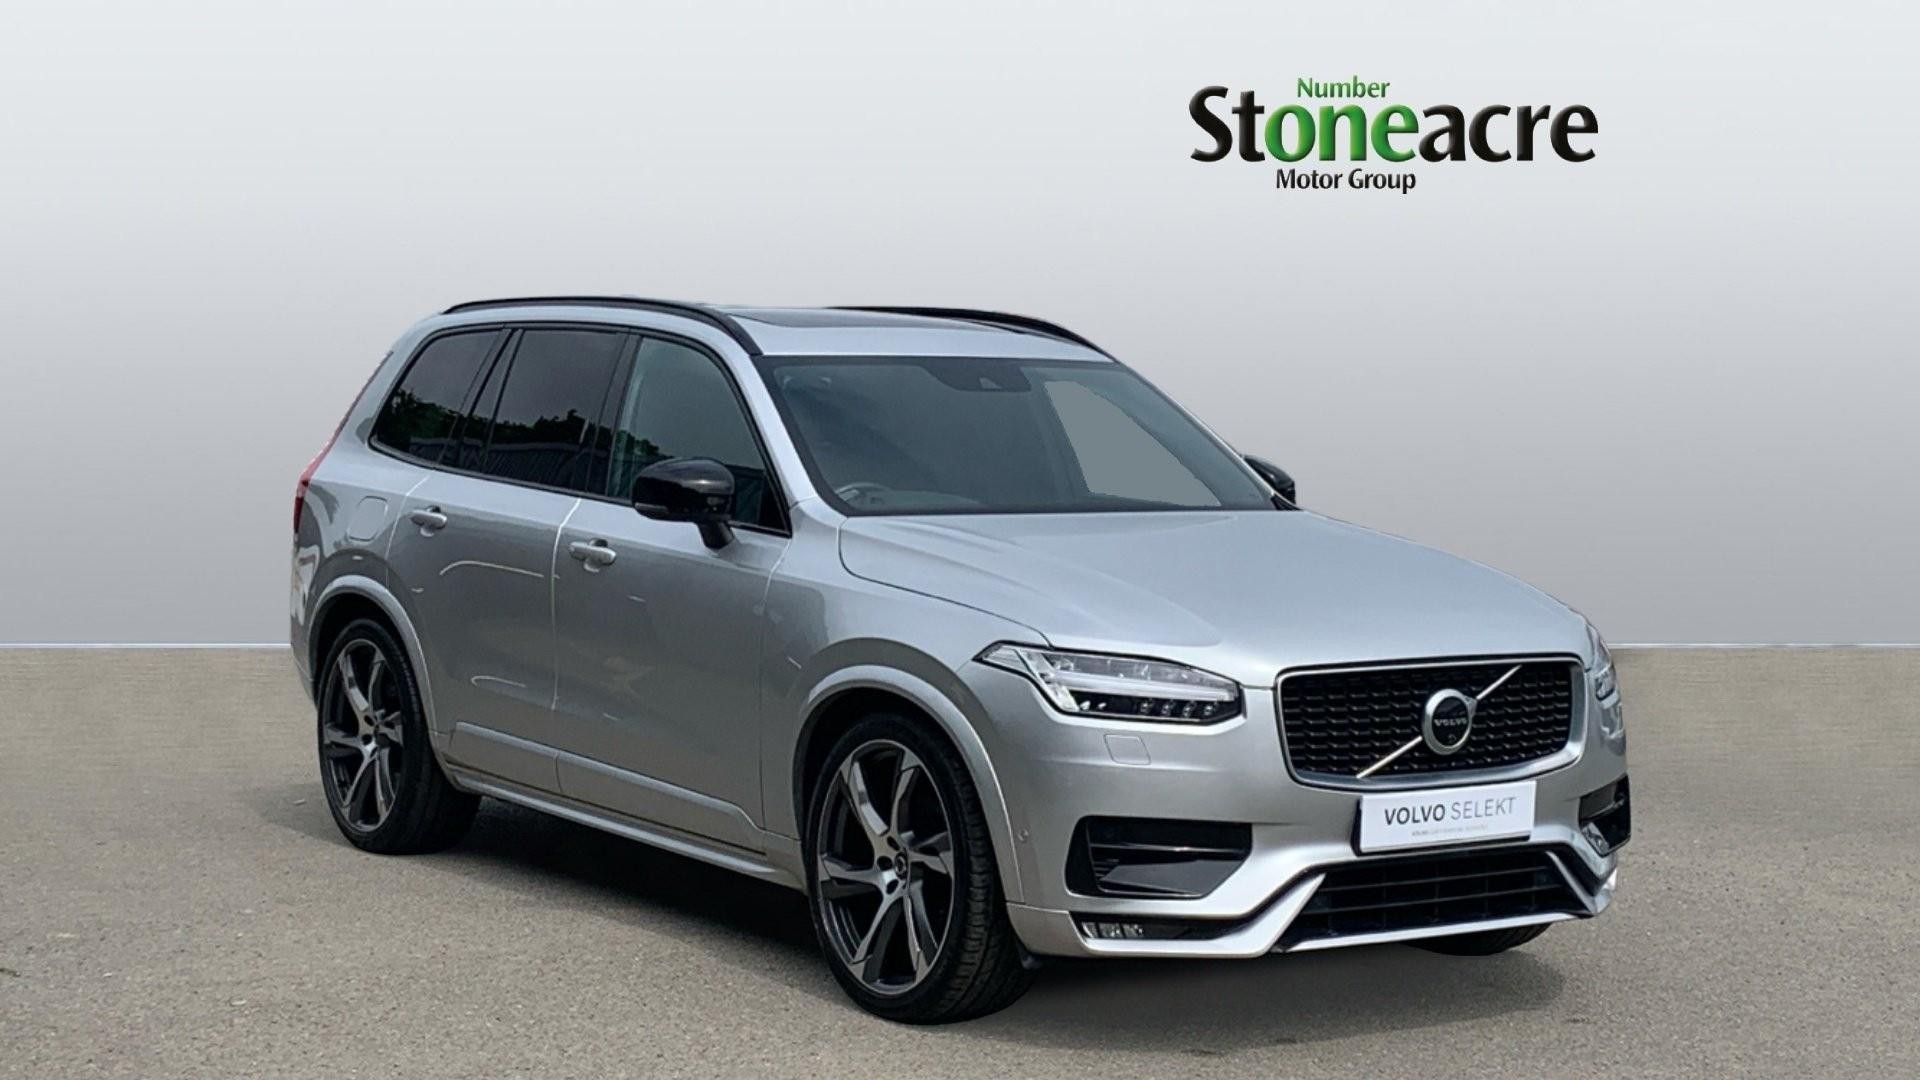 Volvo XC90 2.0 B5D [235] R DESIGN Pro 5dr AWD Geartronic (KN20CGG) image 1